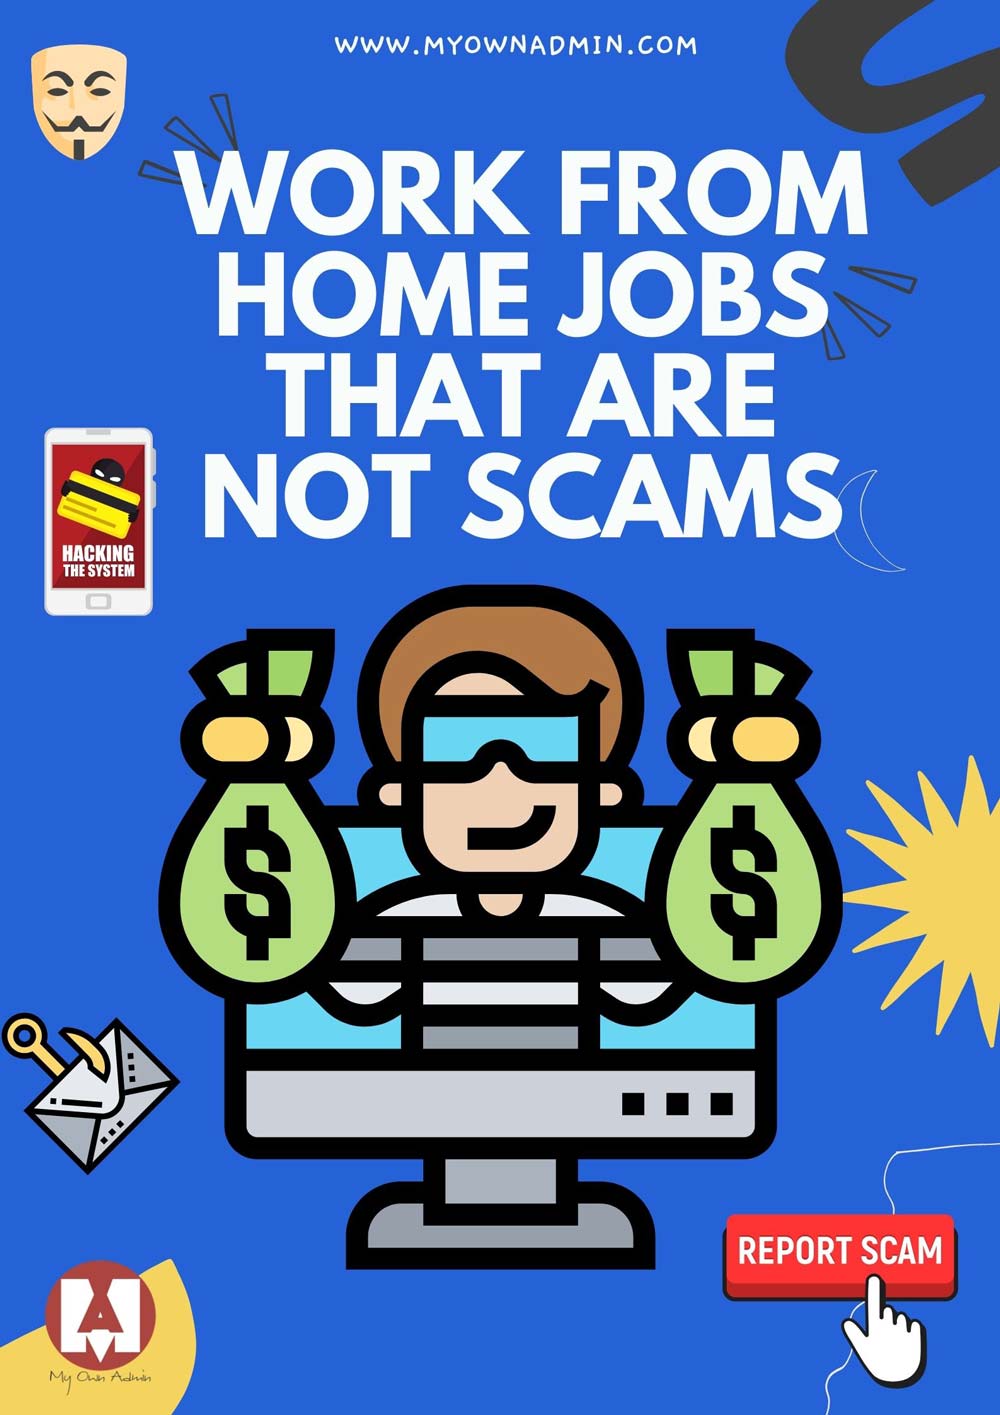 Work From Home Jobs That are Not Scams